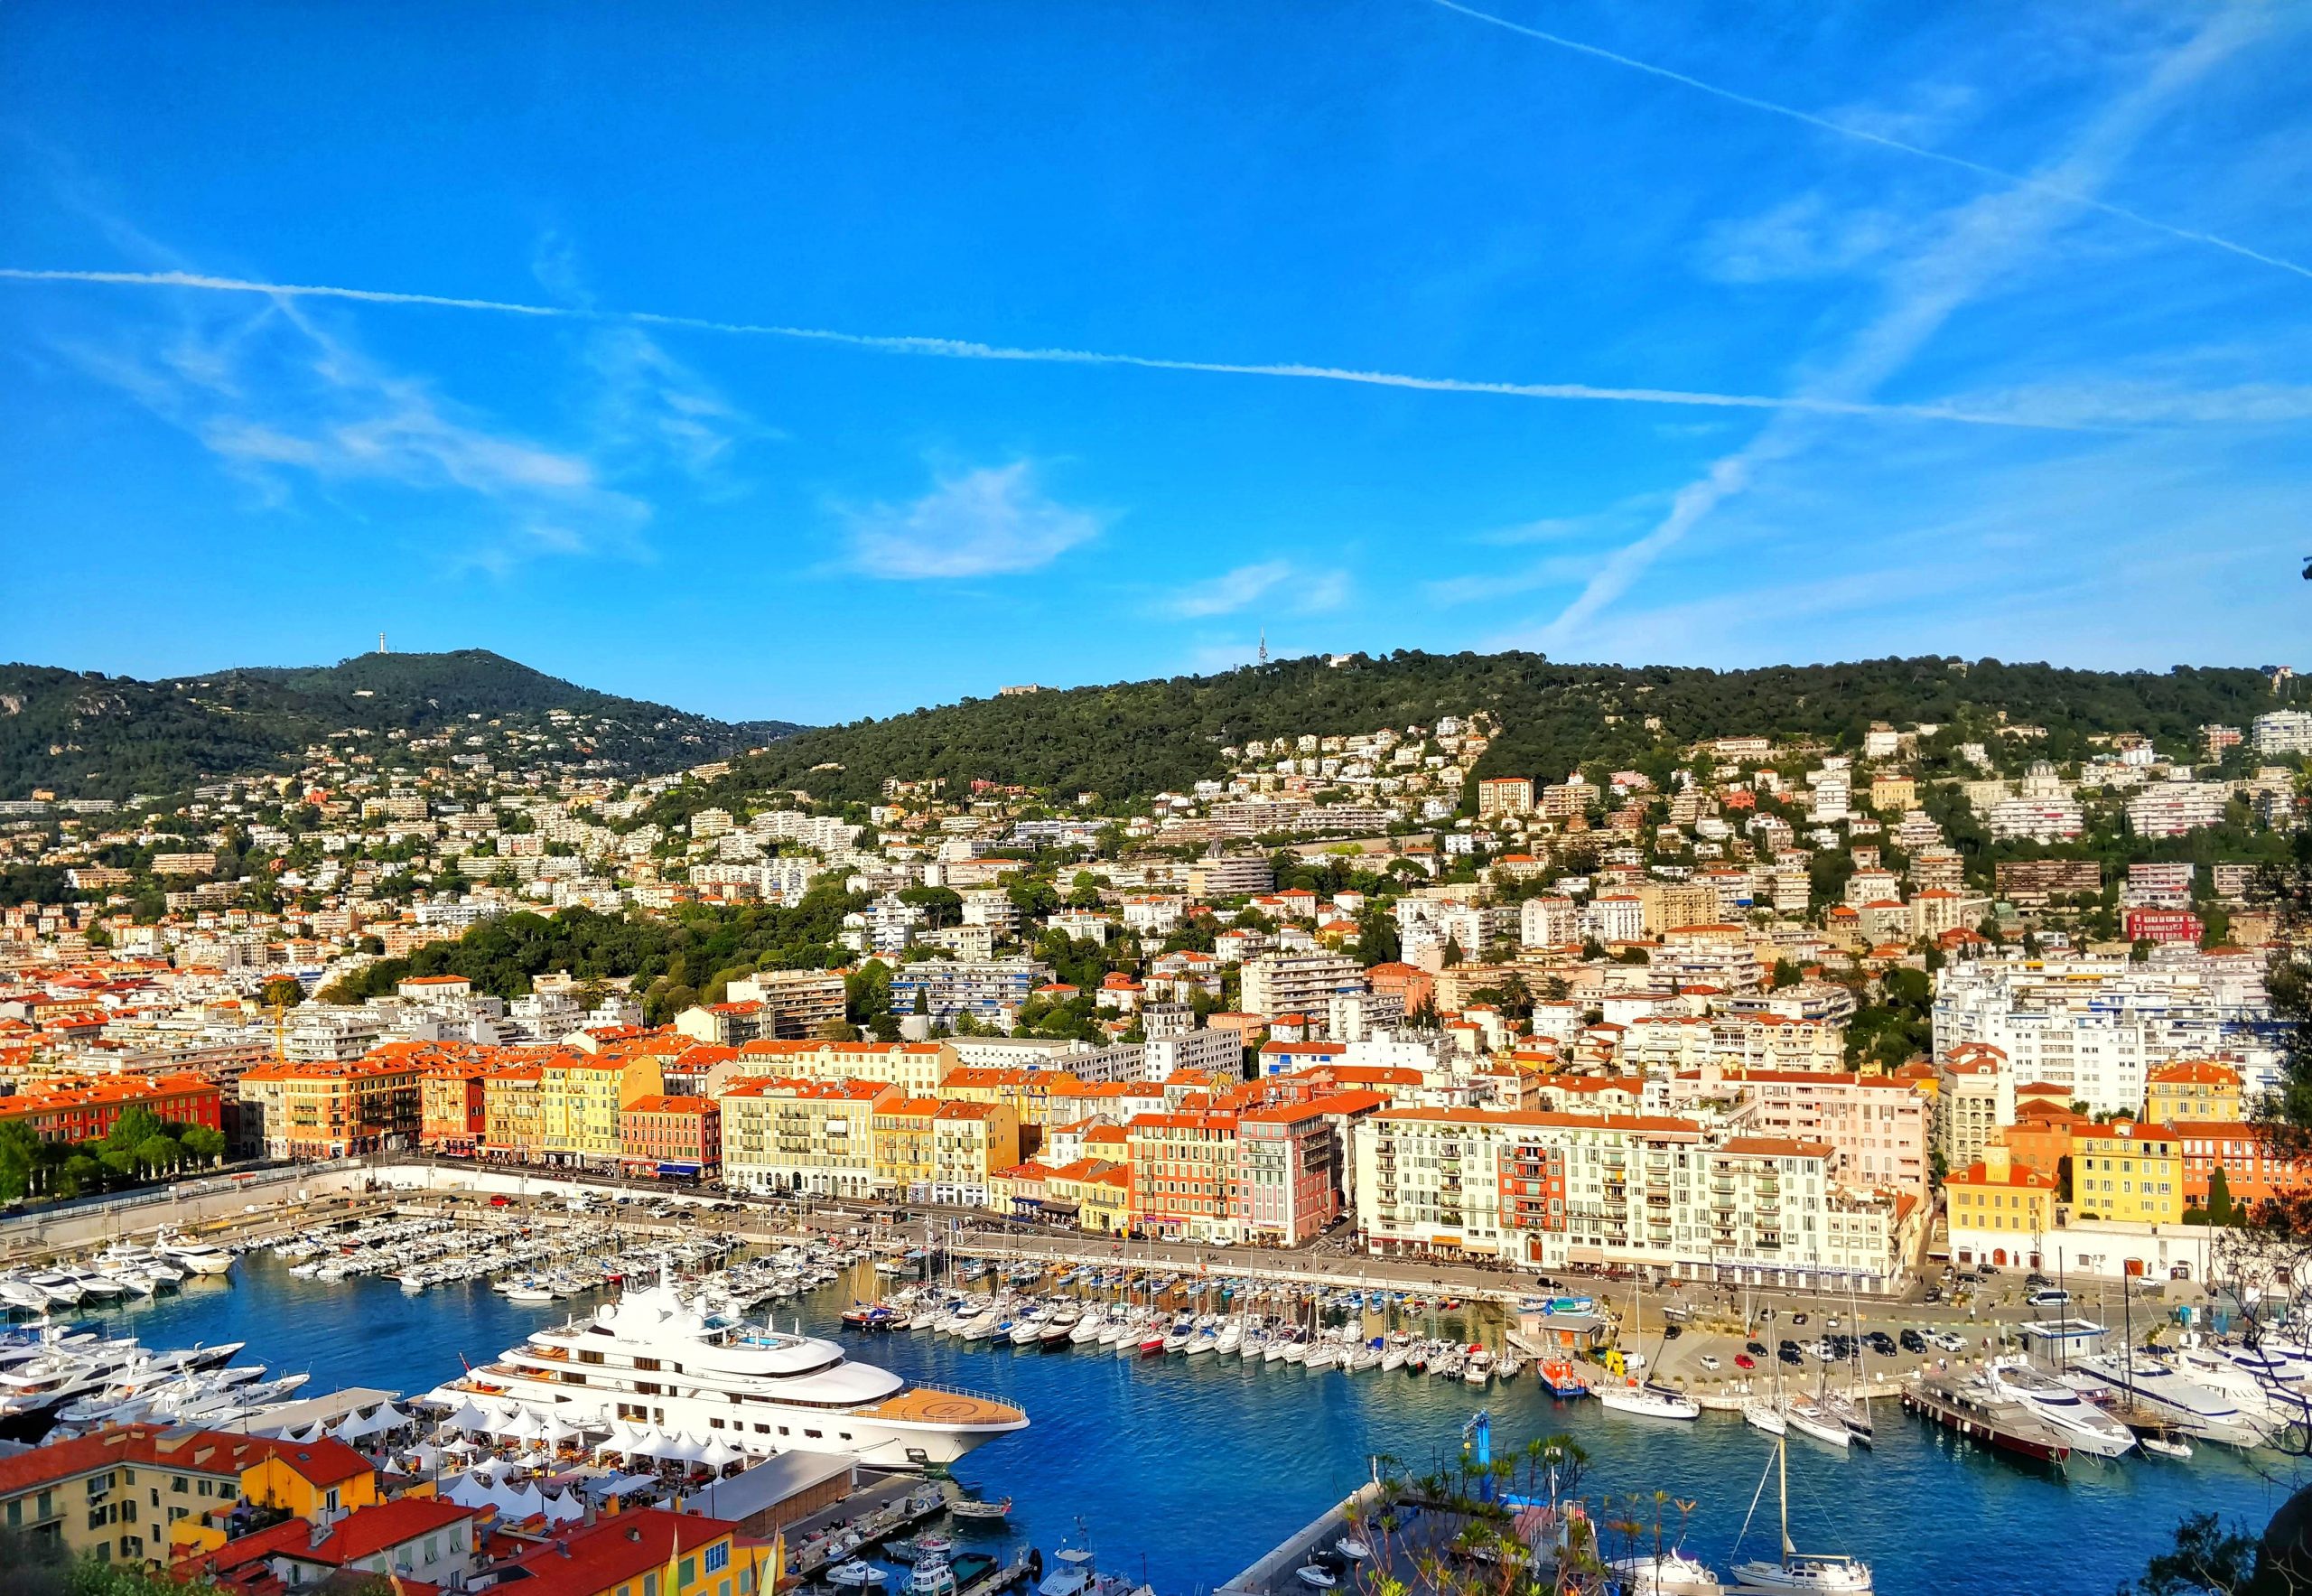 South Of France – Nice, France: Castle Hill (Part 5/5)